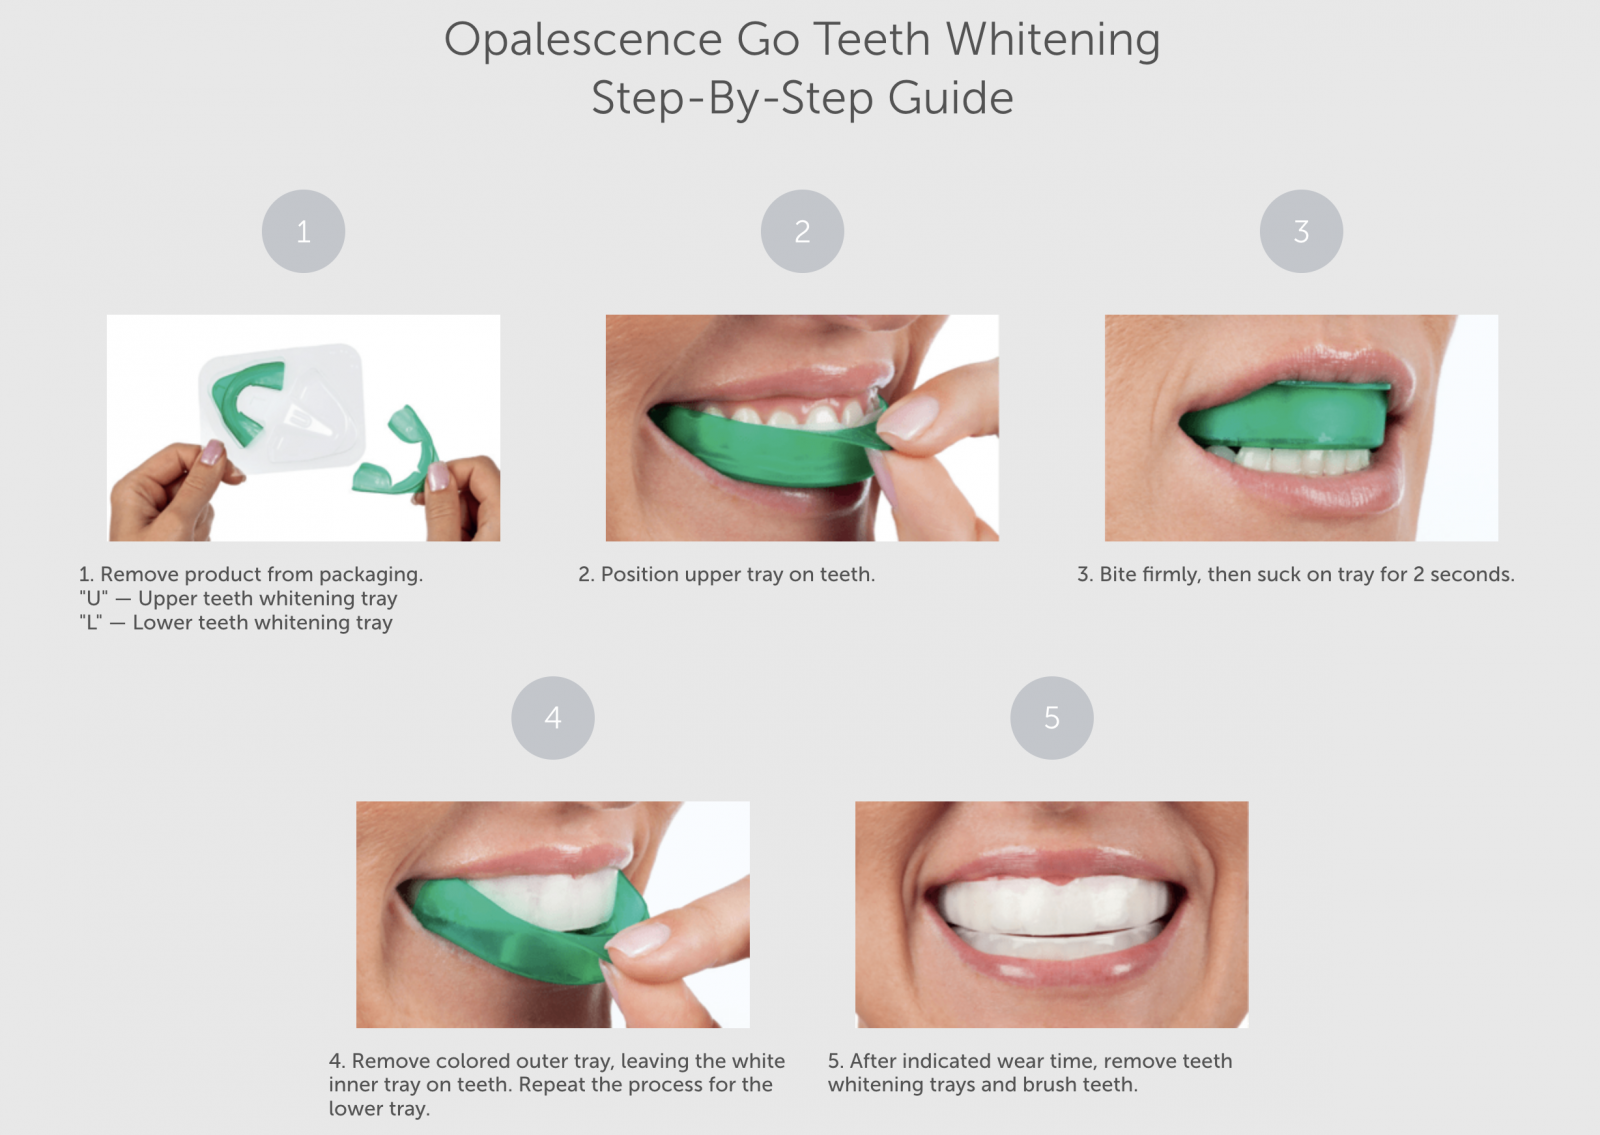 How to Use Opalescence Tooth Whitening - Baird Orthodontics